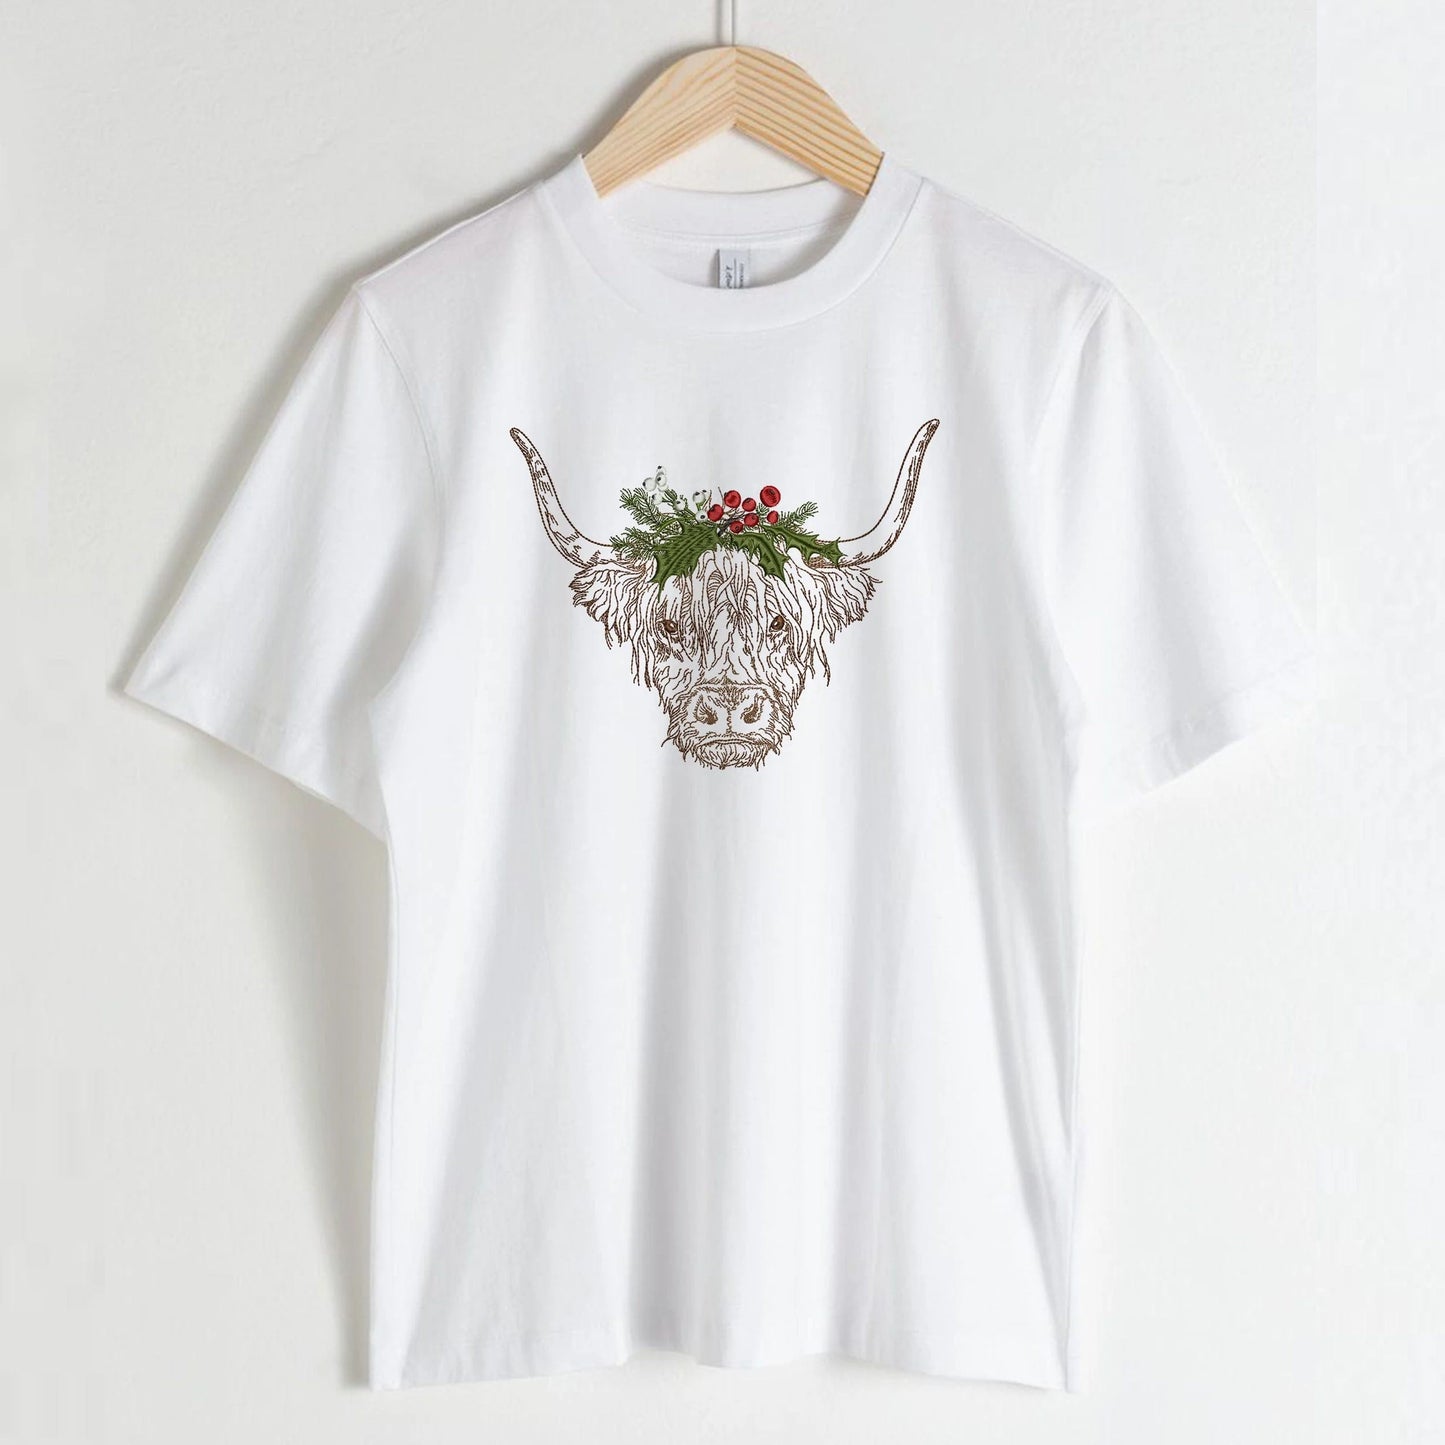 Christmas Highland Cow Machine Embroidery Design on t-shirt blouse